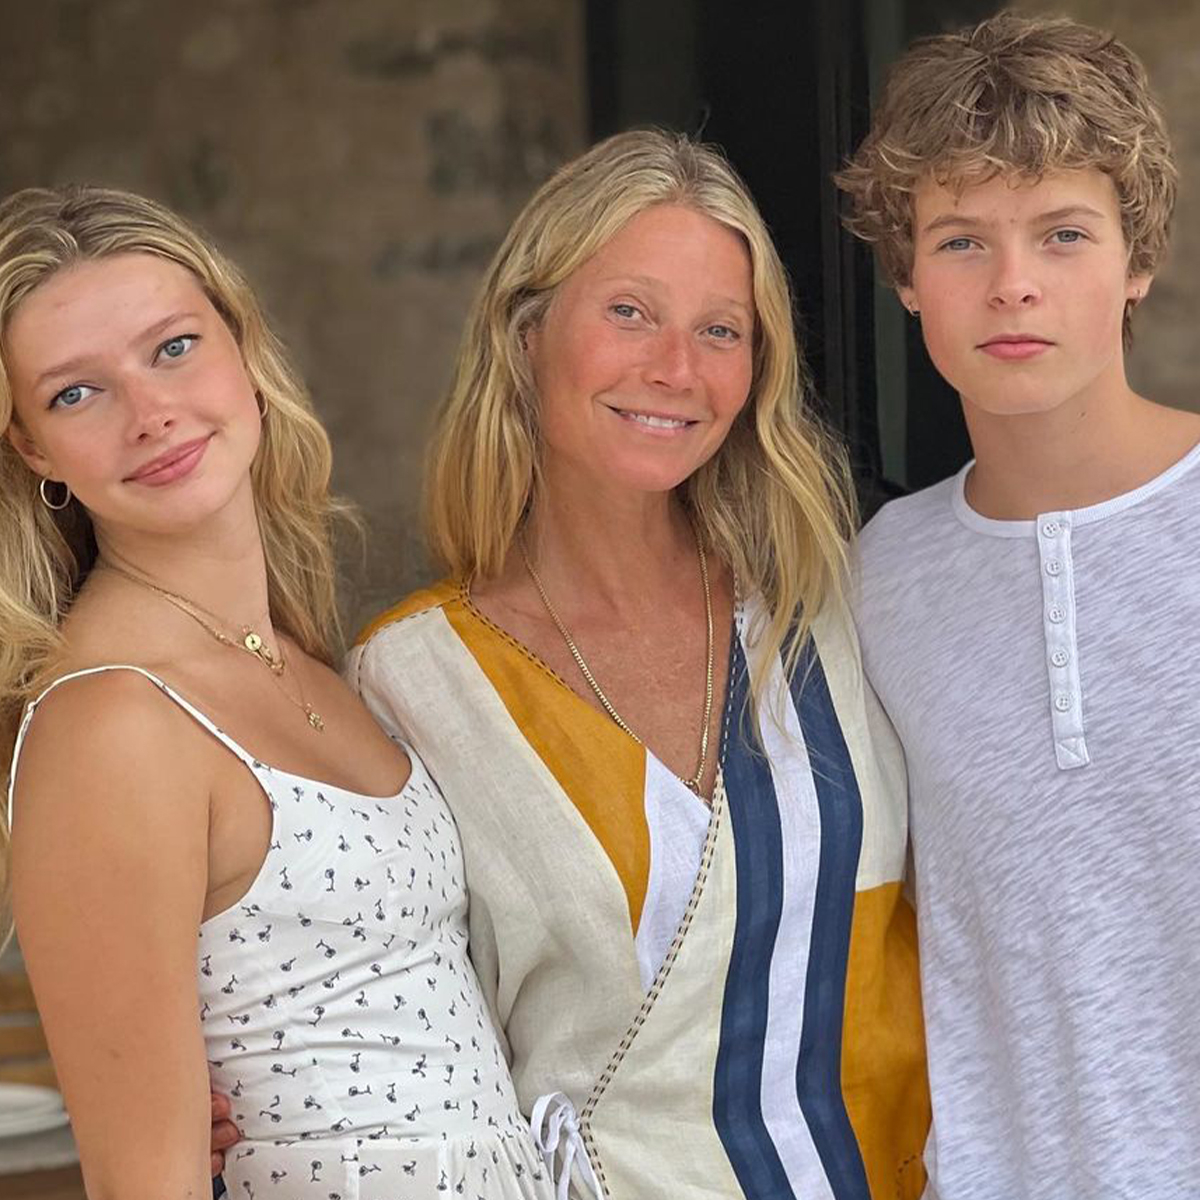 Gwyneth Paltrow’s Kids Apple, Moses Martin Look So Grown Up in New Pic